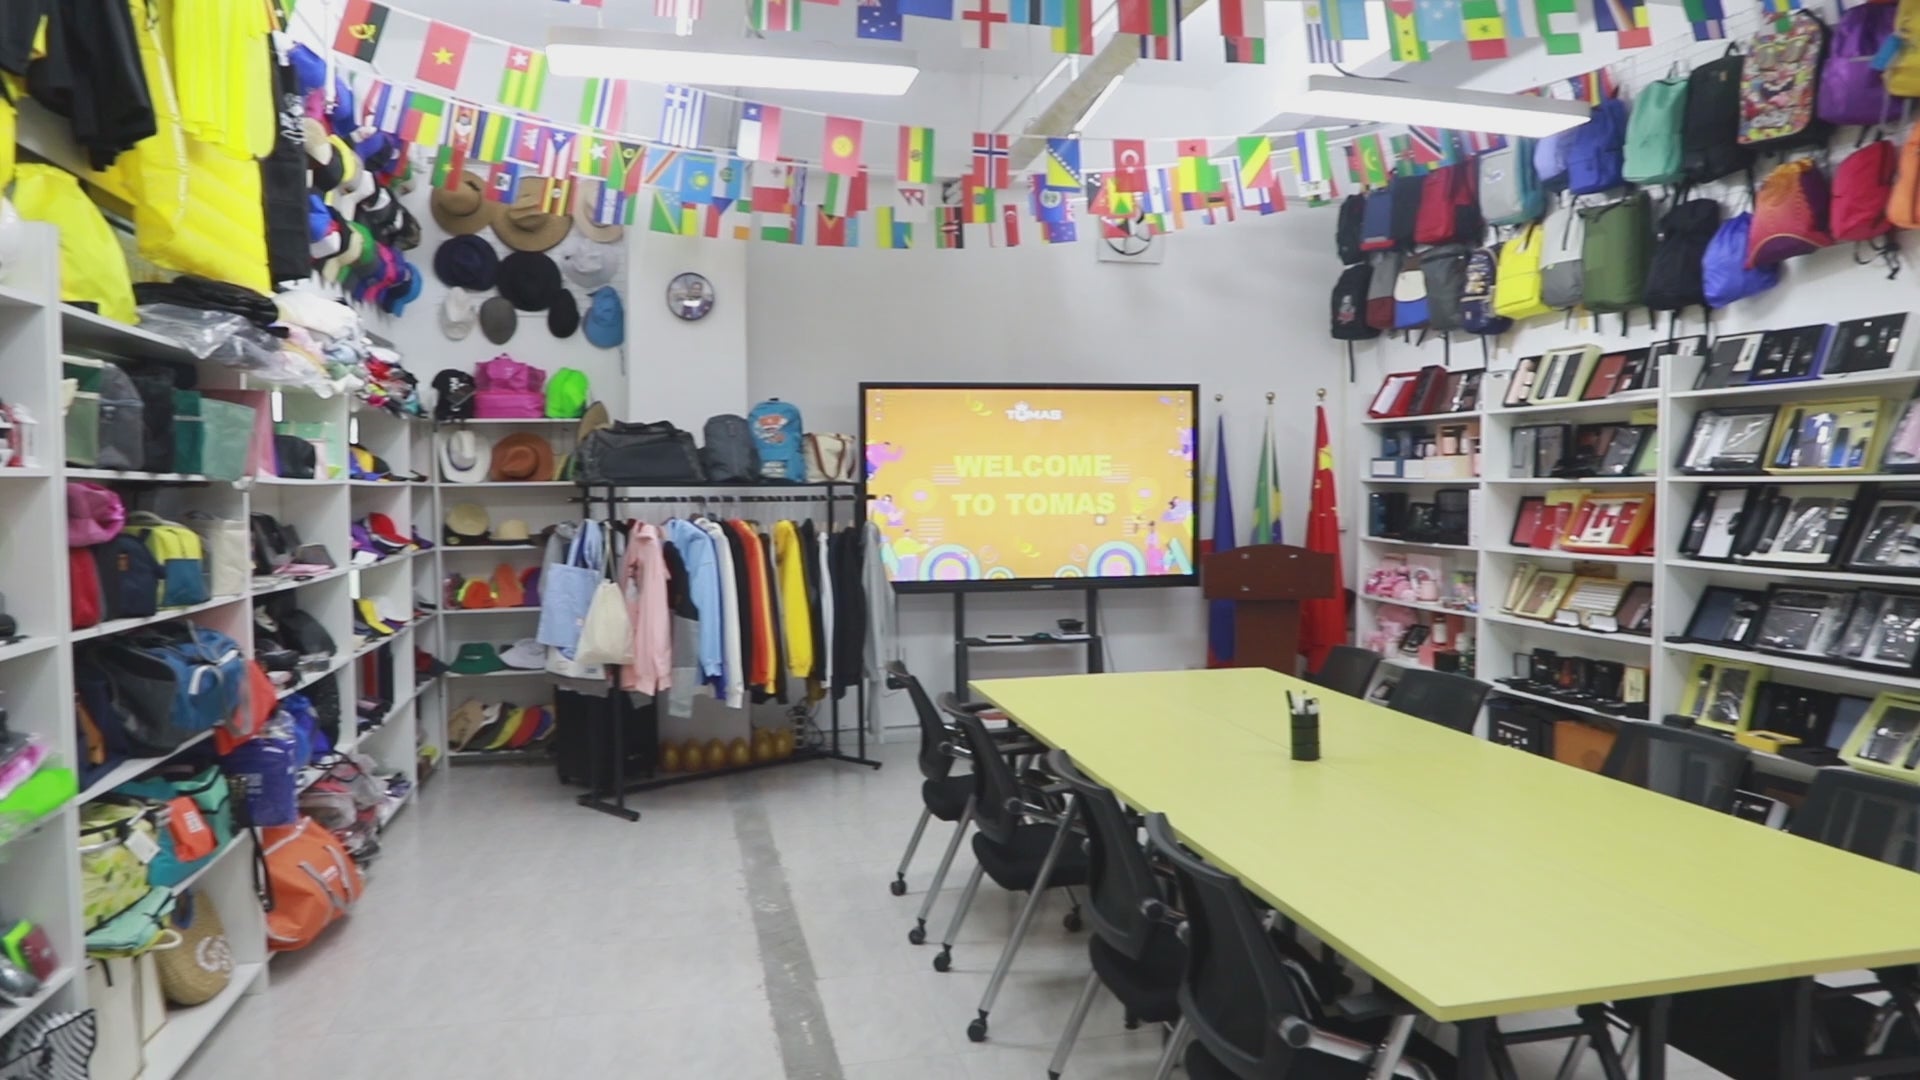 Carica il video: TOMAS is both a manufacturer &amp; exporter of different kinds of promotional products and souvenir gifts, locates in Guangzhou City China, founded in 2011. We have our 100% own factory in Dongguan, producing metal &amp; plastic material products. However, in order to provide &amp; create better purchasing experience for our clients, we started to source outside in 2013 and have offered one-stop solutions for different events &amp; activities since then. One-Stop Solution can help you save time, cost and headache of purchasing &amp; communicating here and there.